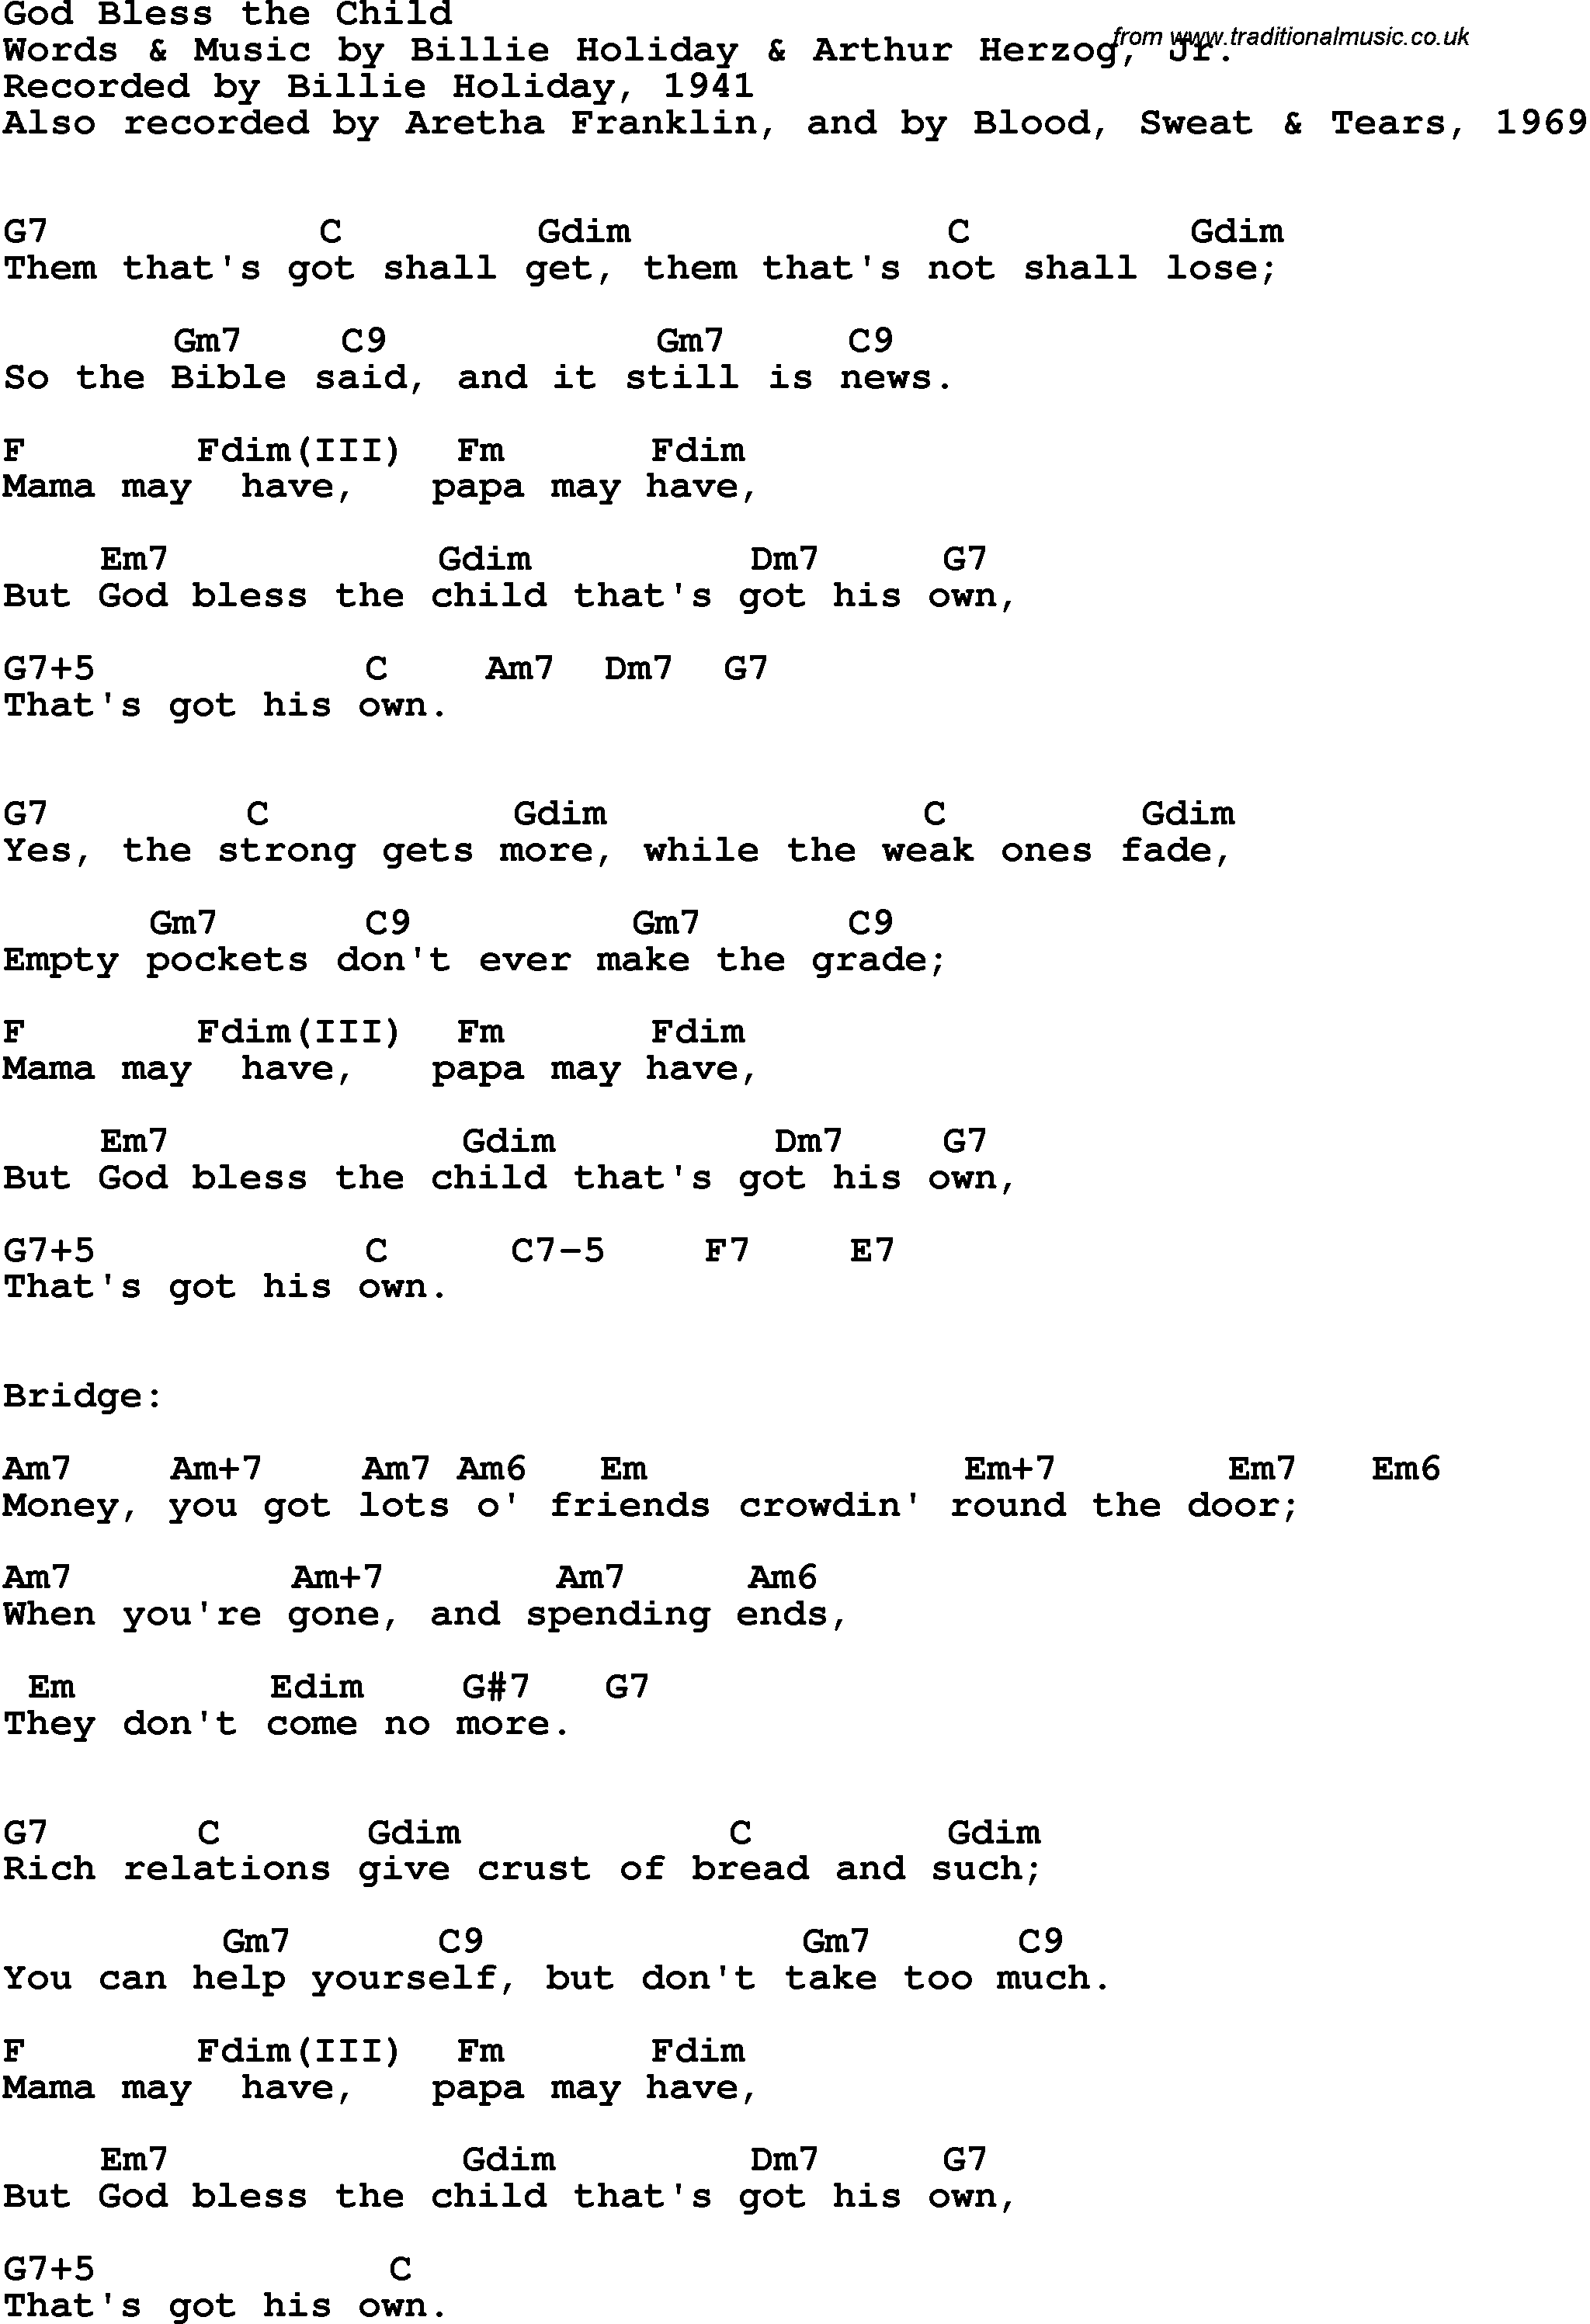 Song Lyrics with guitar chords for God Bless The Child - Billie Holiday, 1941